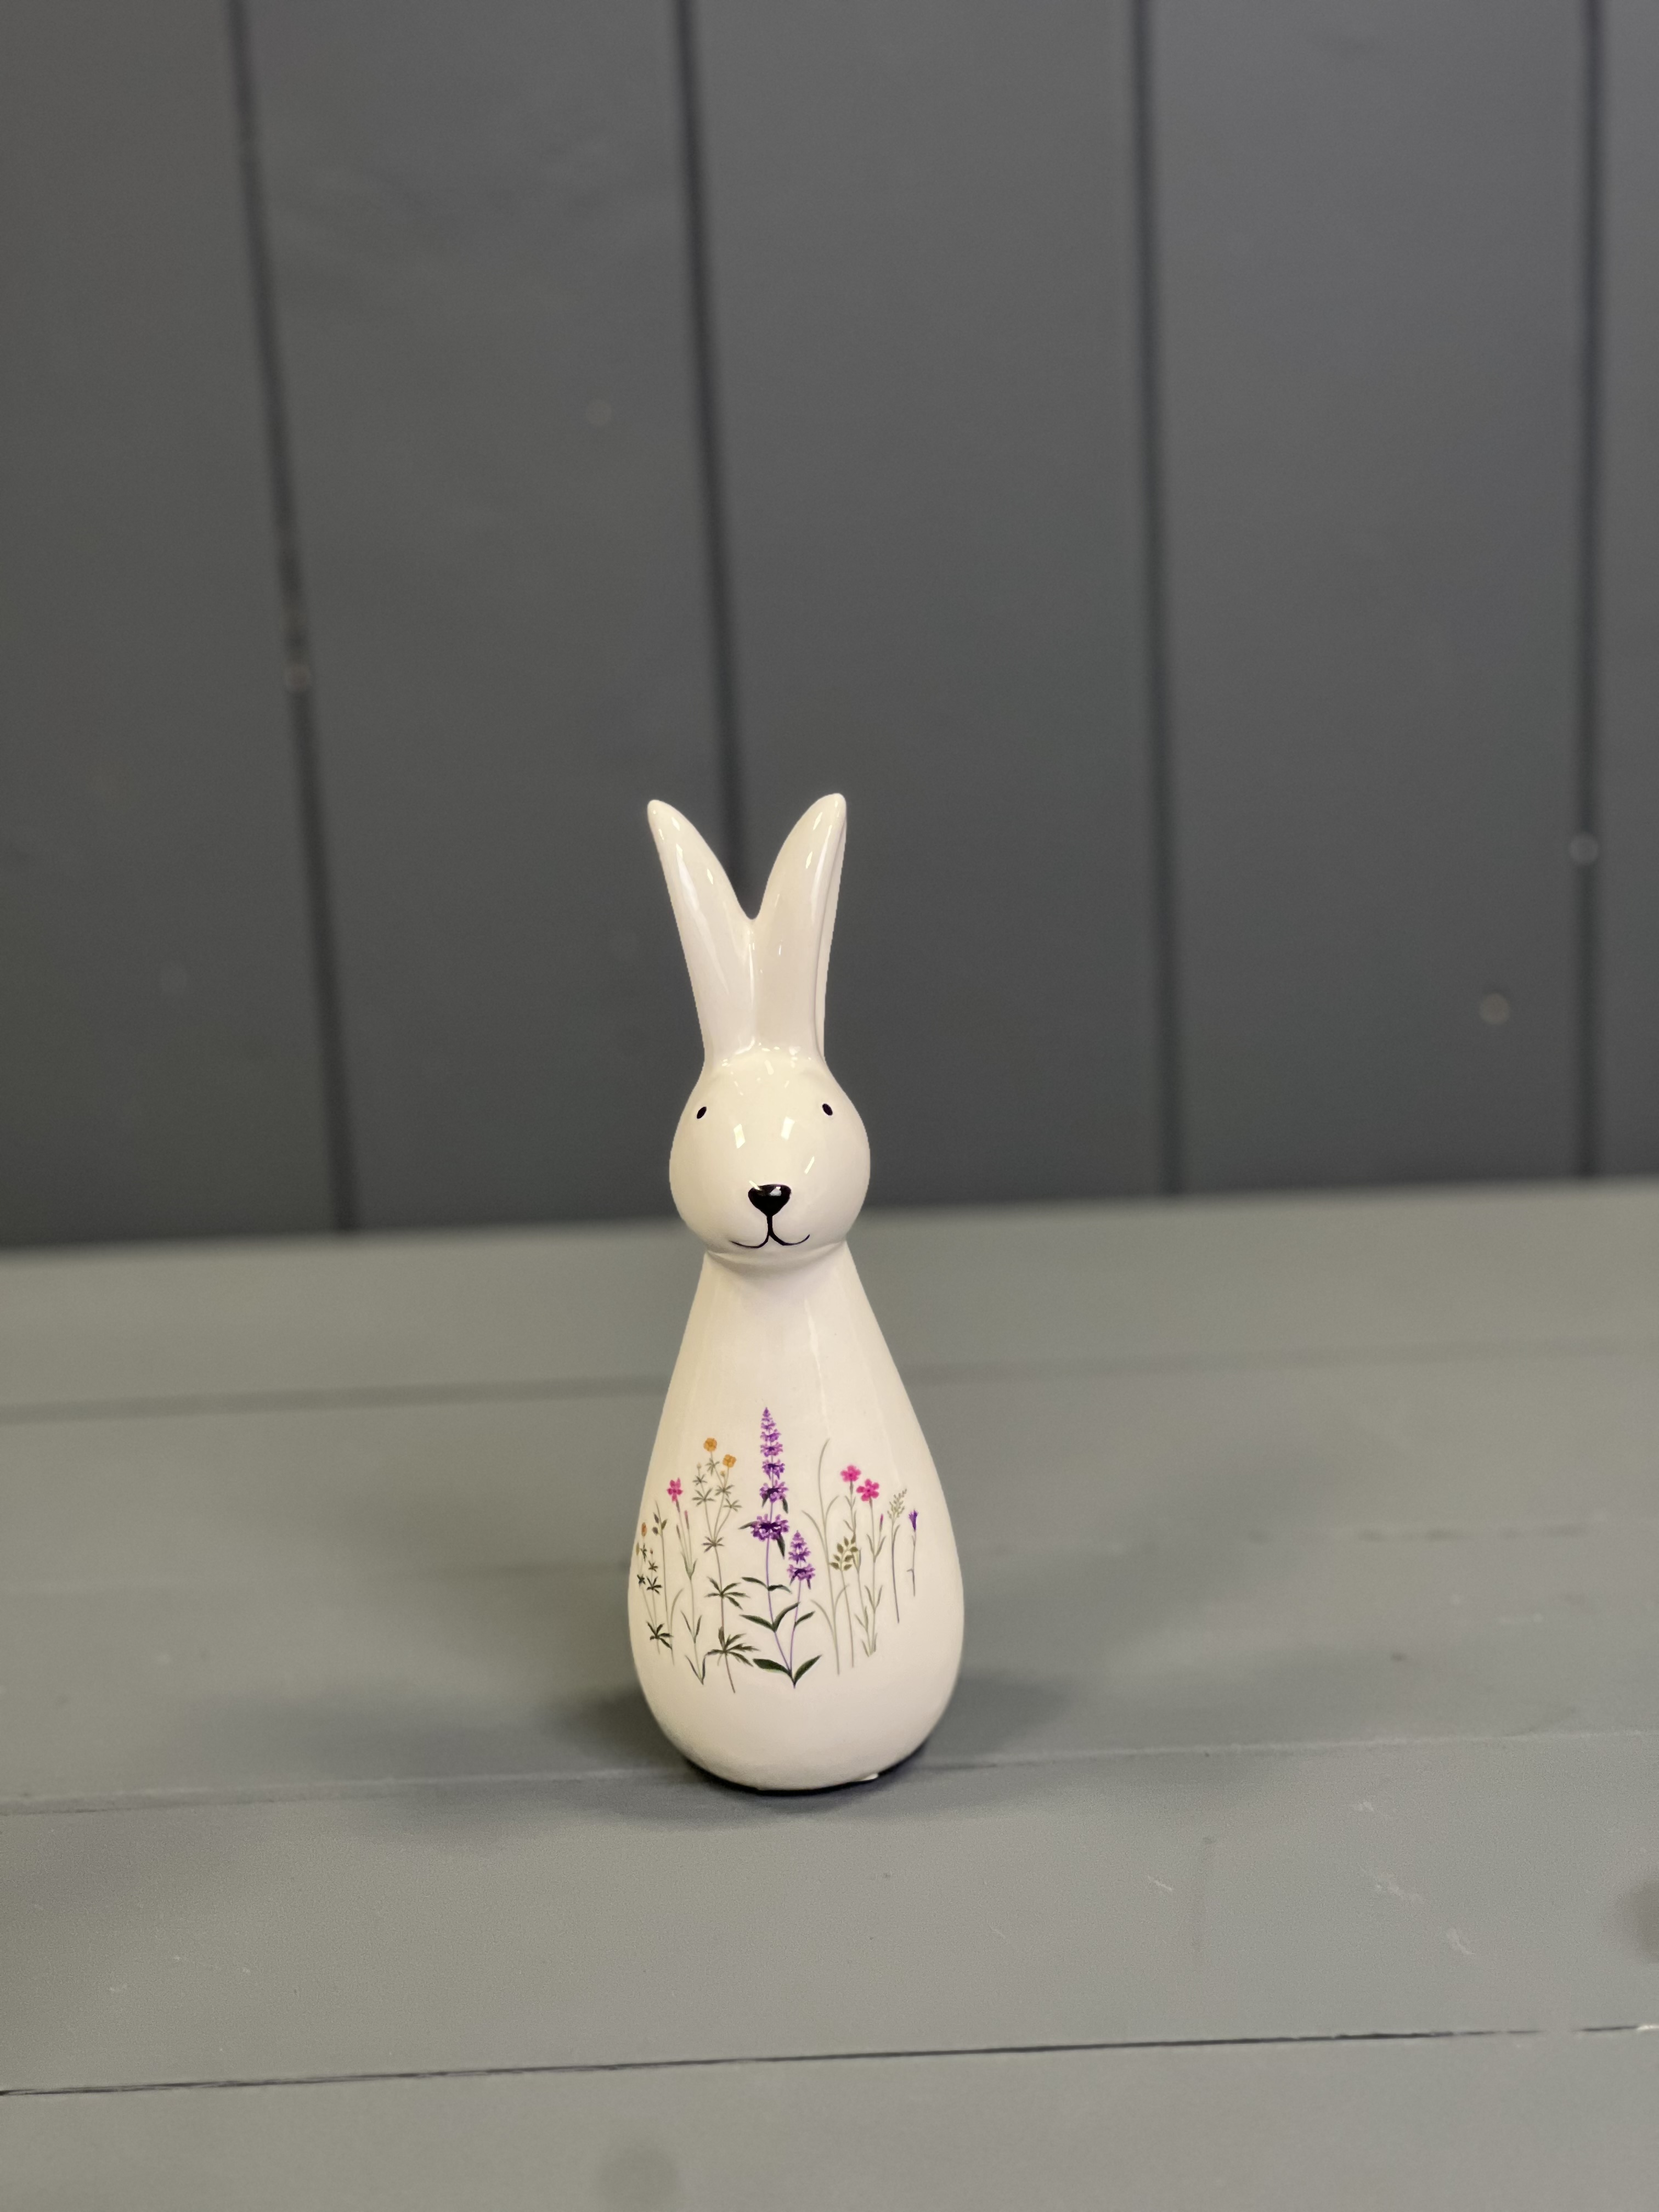 Medium Tall Meadow Patterned Rabbit Ornament detail page